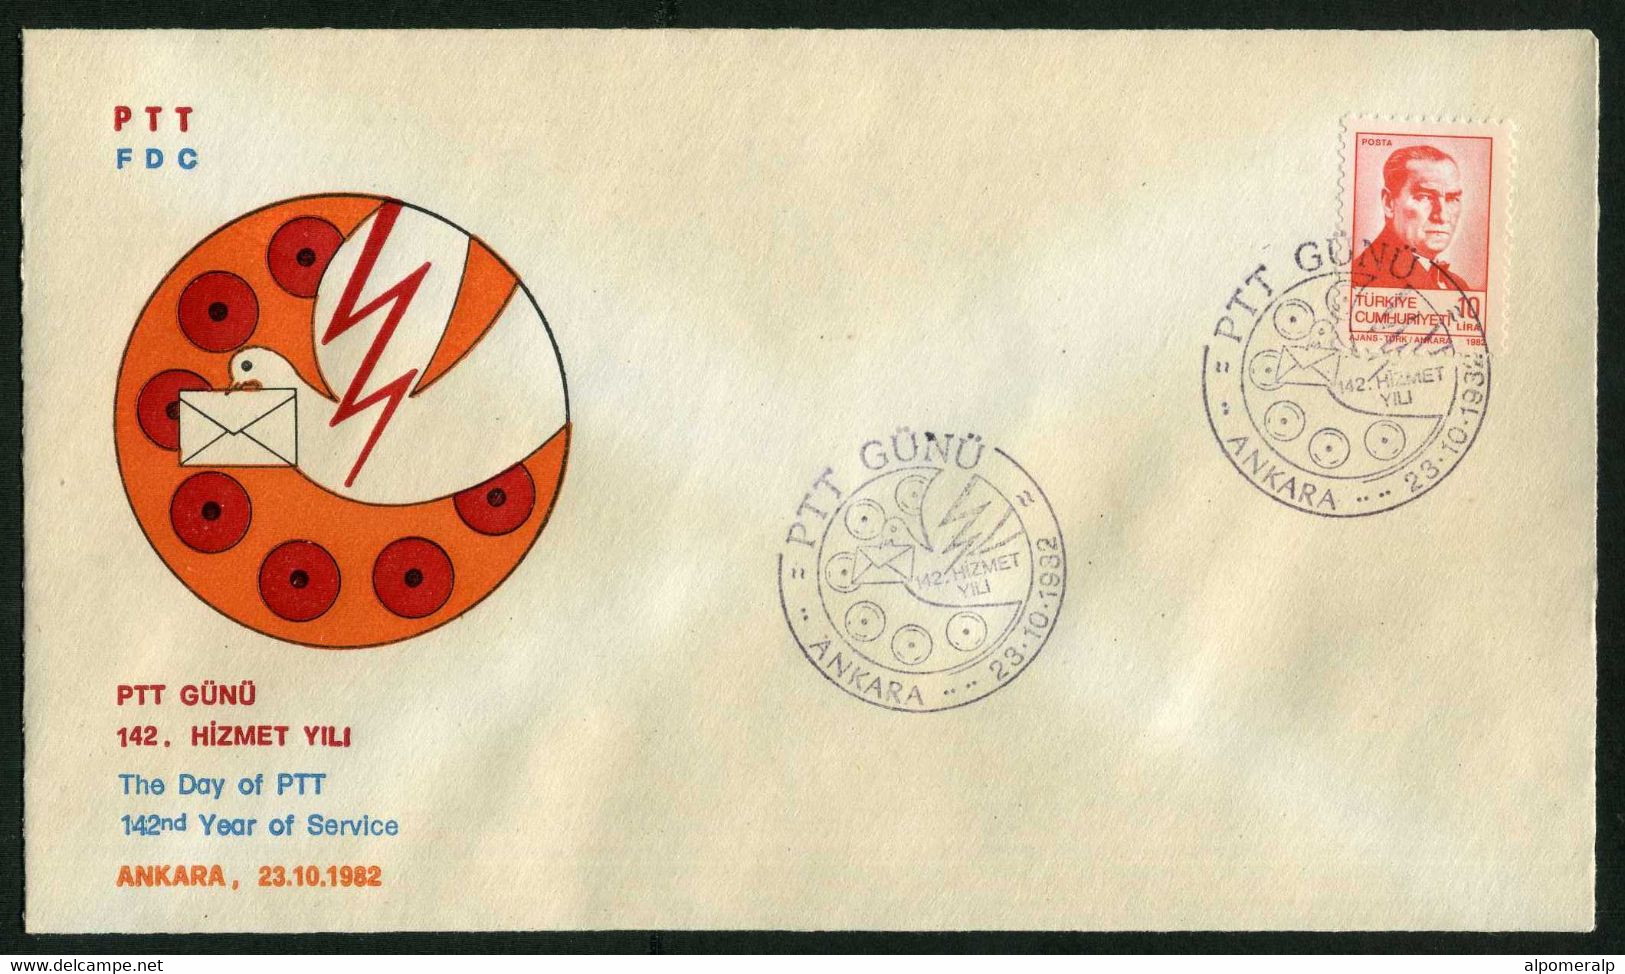 Türkiye 1982 The Day Of PTT (Postal, Telegraph, Telephone) 142nd Year Of Service | Mail Pigeon, Letter, Special Cover - Covers & Documents